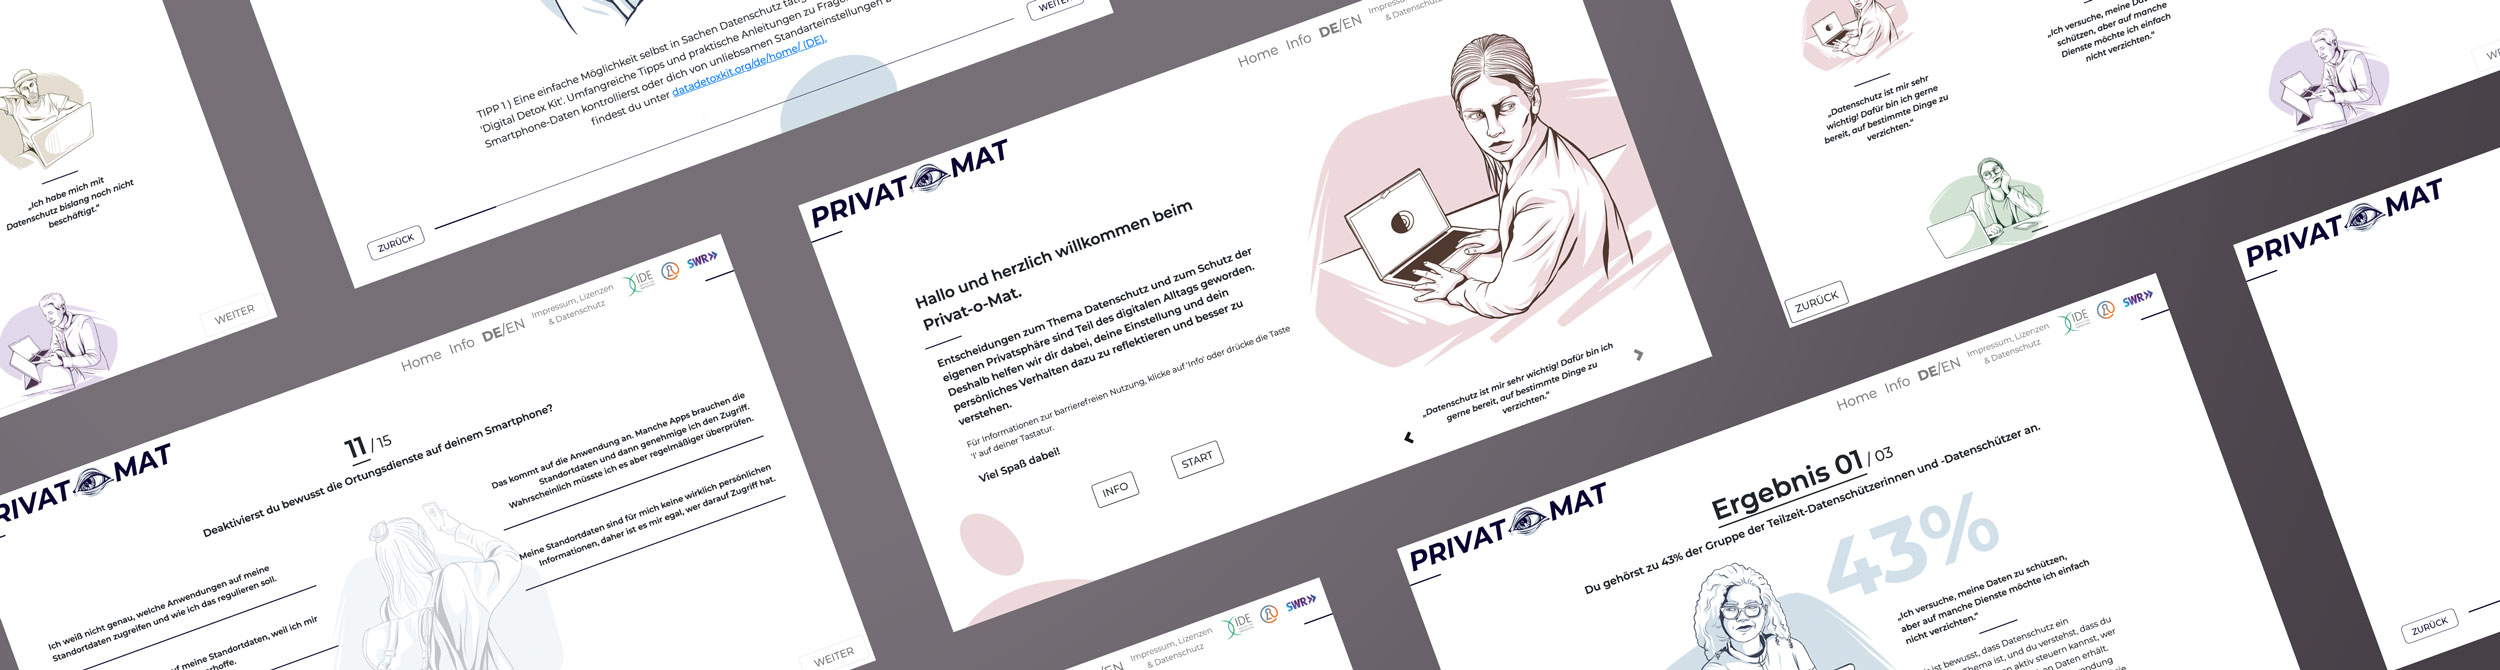 Medienethisches Tool Privat-o-Mat